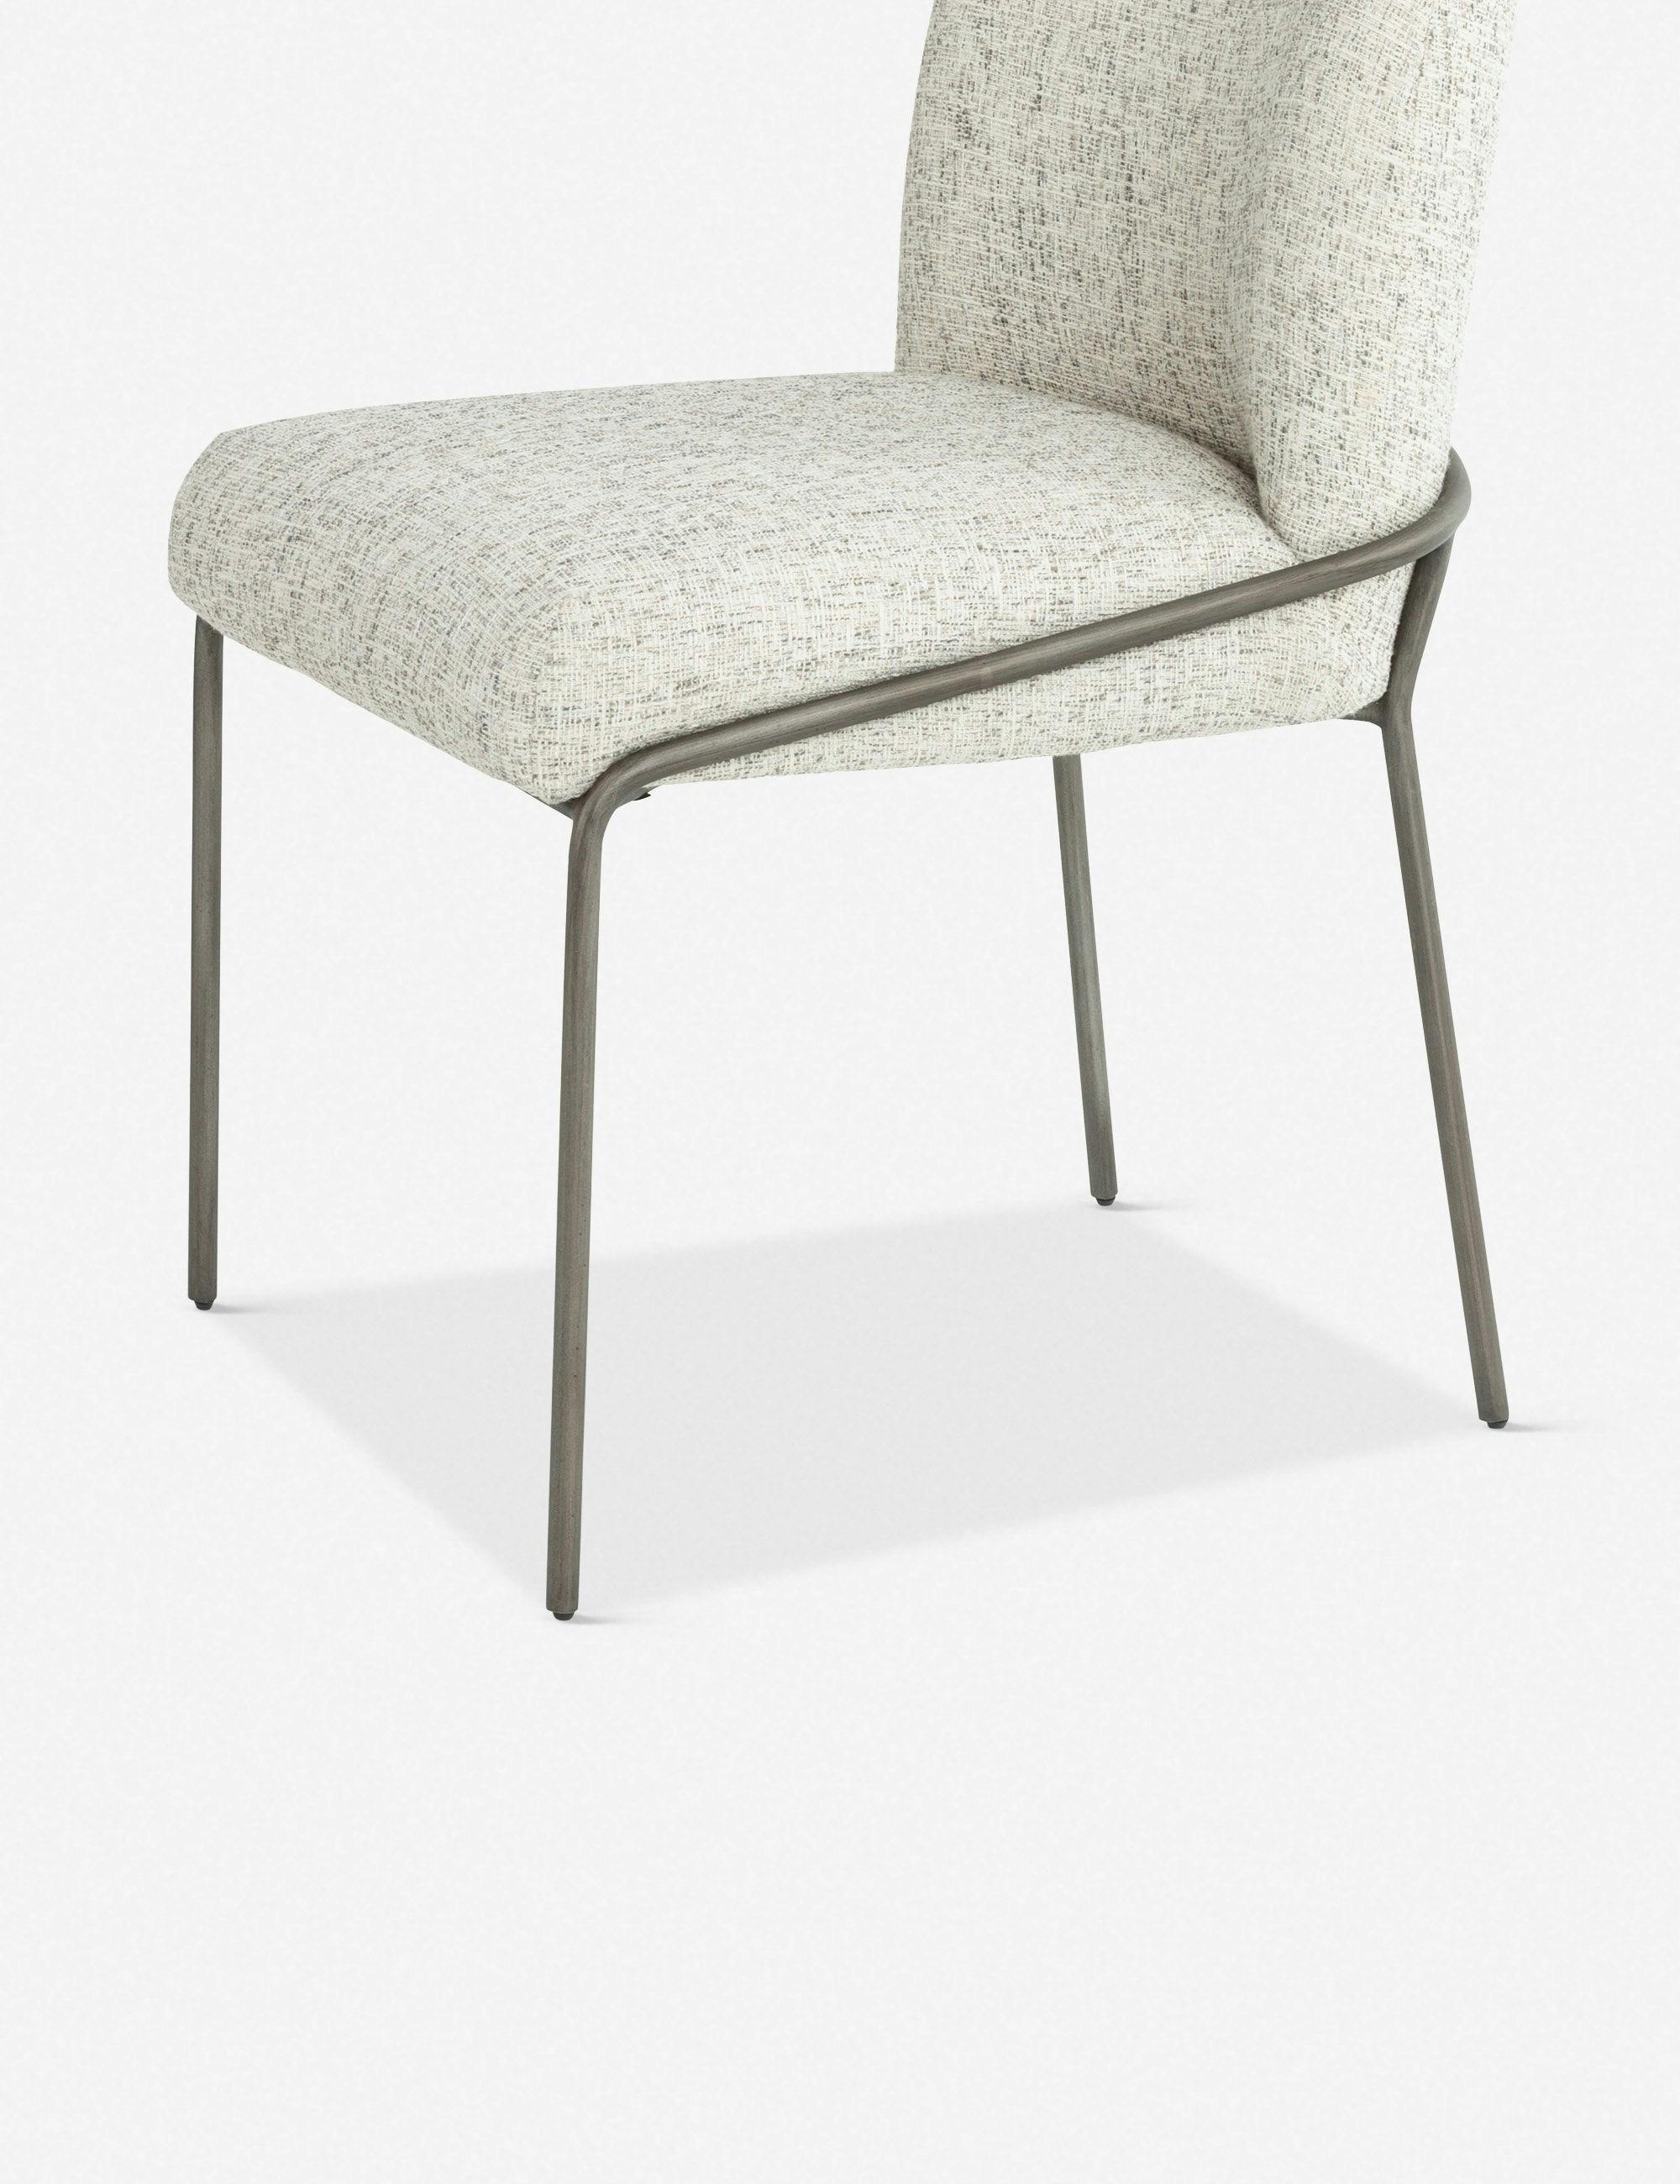 Roxanne Curved Back Grey Dining Chair